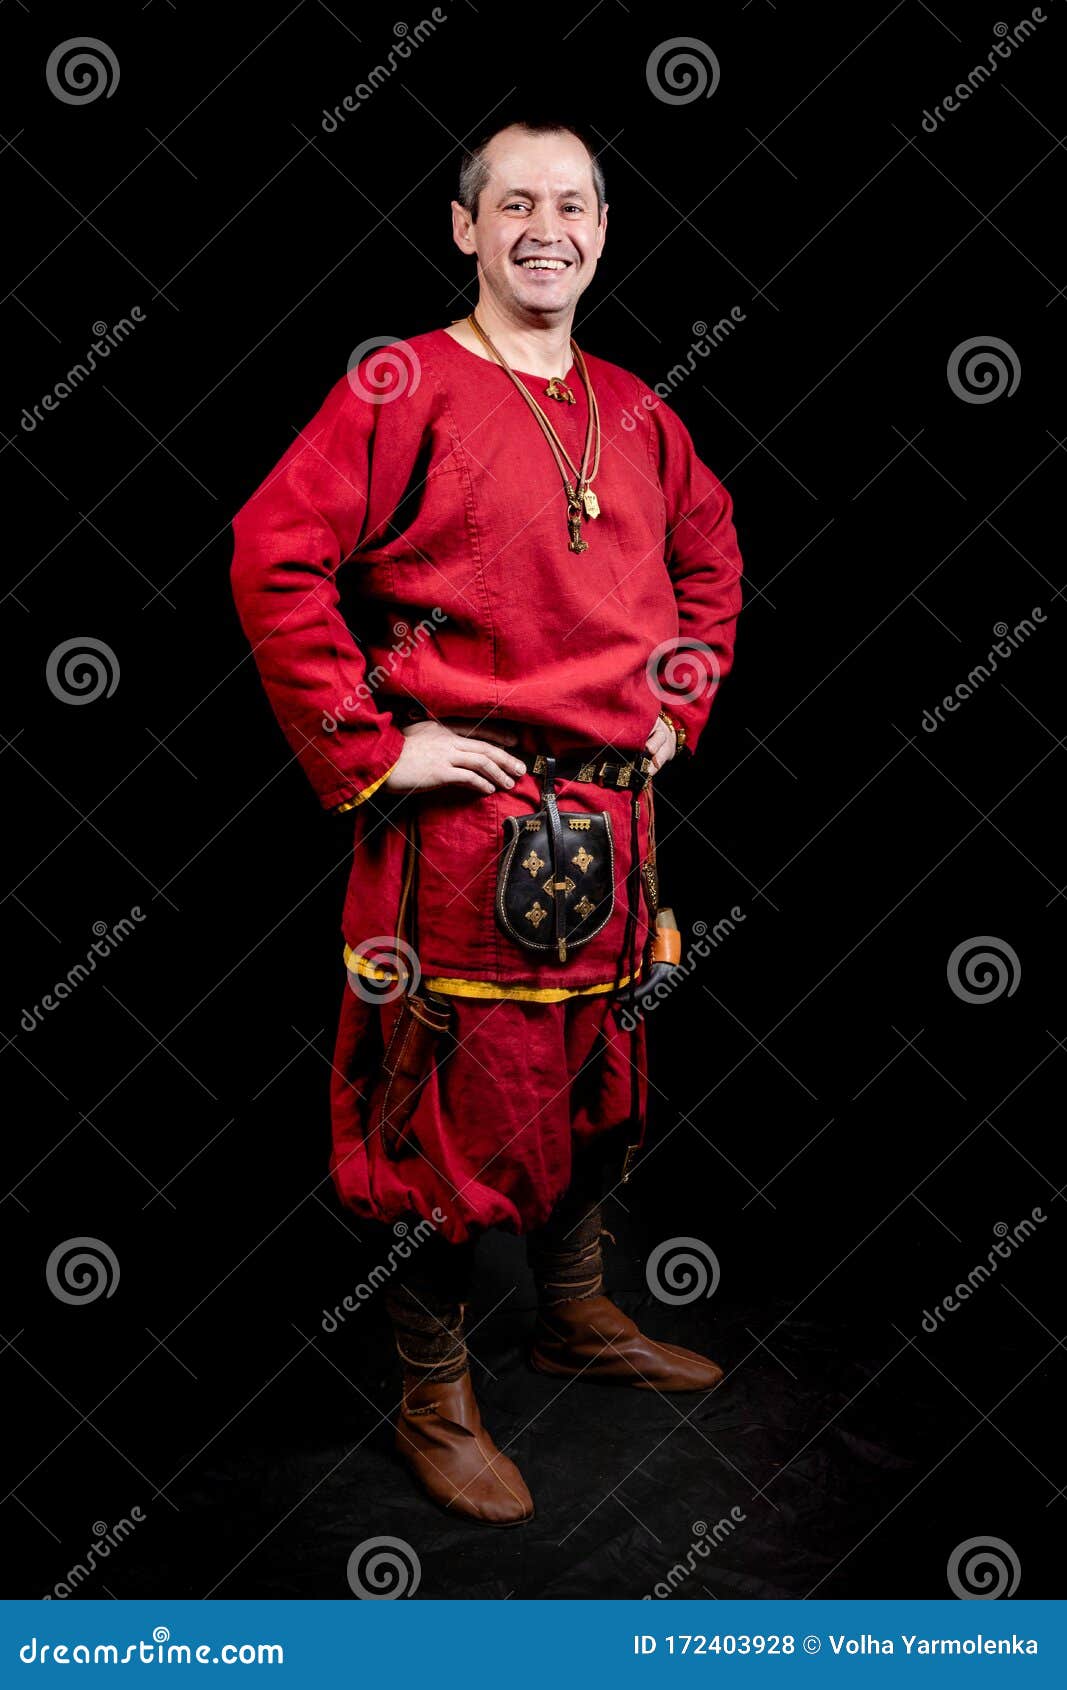 A Poses in Ancient Clothing: a Red Shirt, Pants, Jewelry, Ancient Shoes. Man Smiling Stock - Image of early, fashion: 172403928